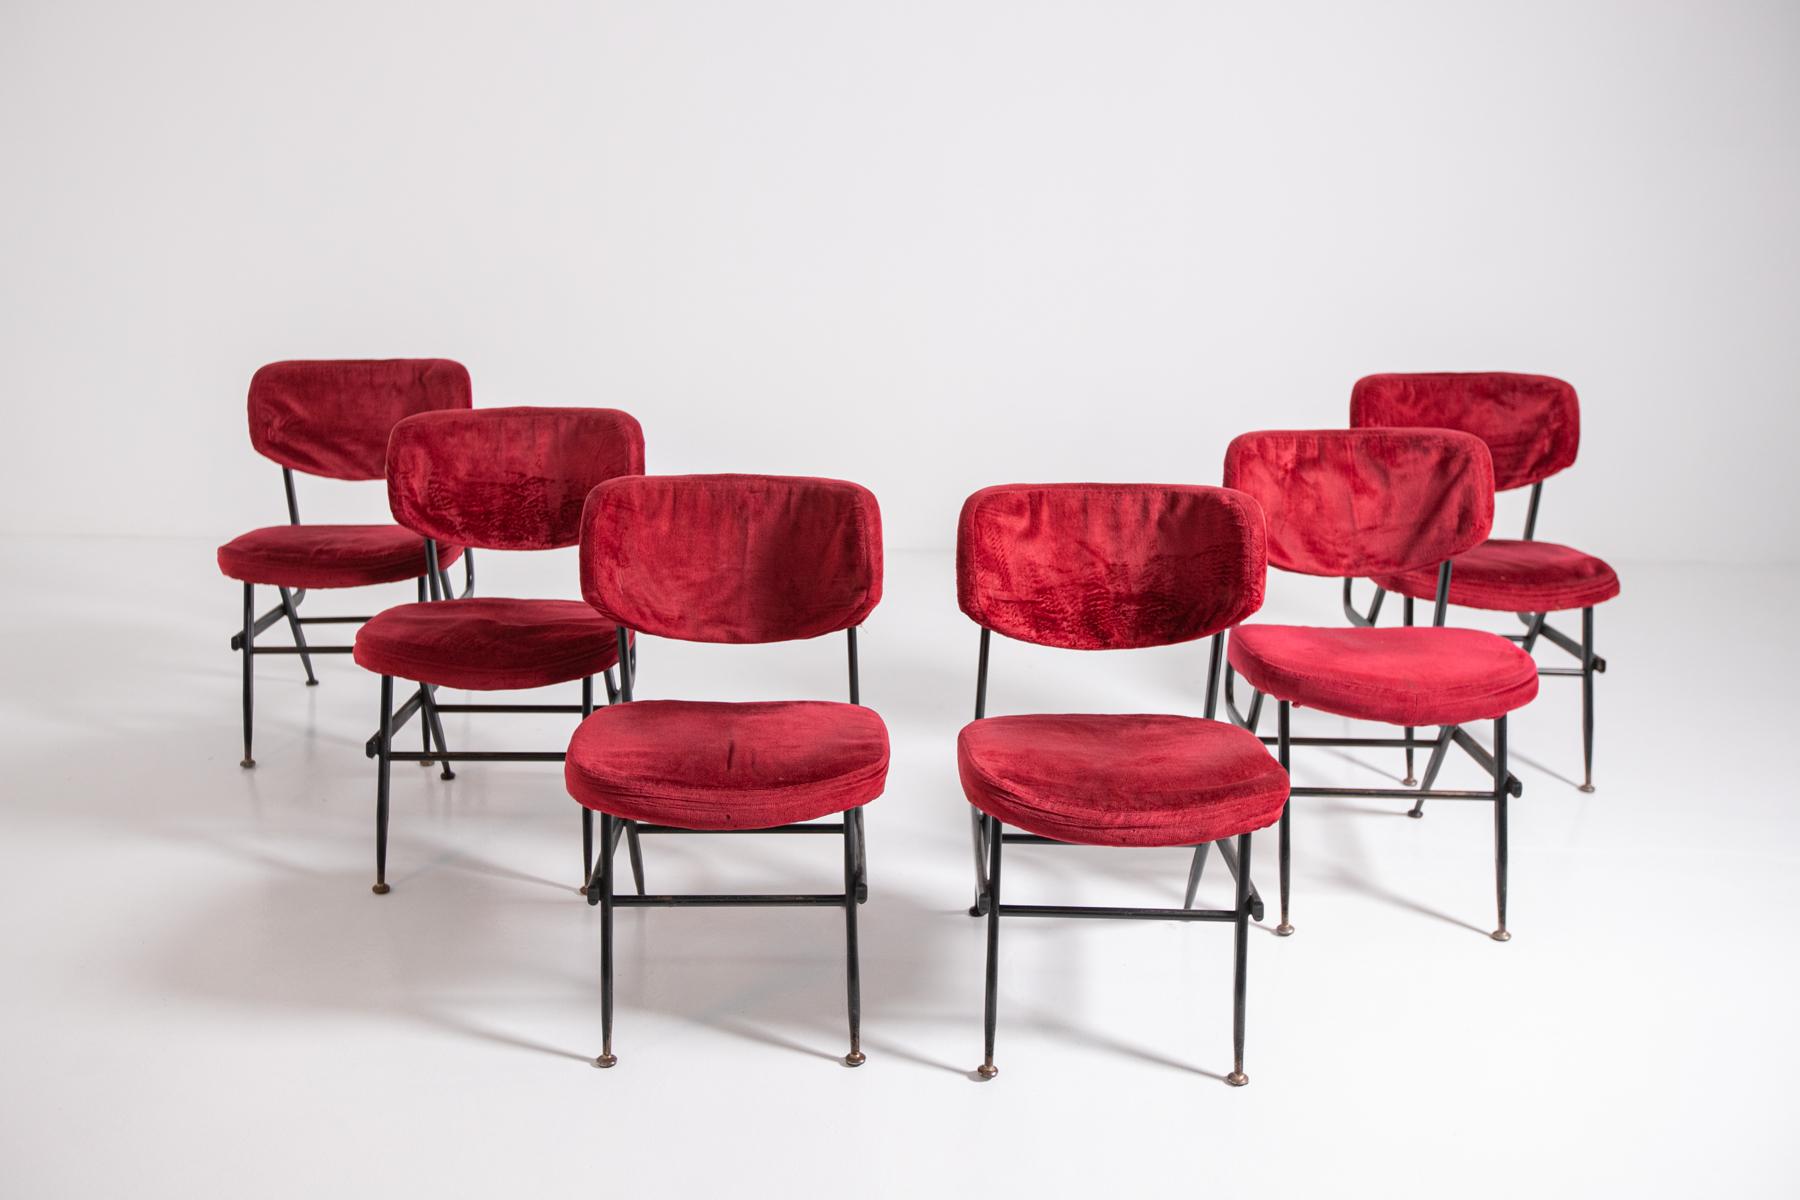 Beautiful set of six Italian chairs from the 1950s. The set has a black painted iron frame, forming geometric lines and a pleasing style. The feet have round brass ferrules, while the seat and backrest upholstery is in dark red velvet original to